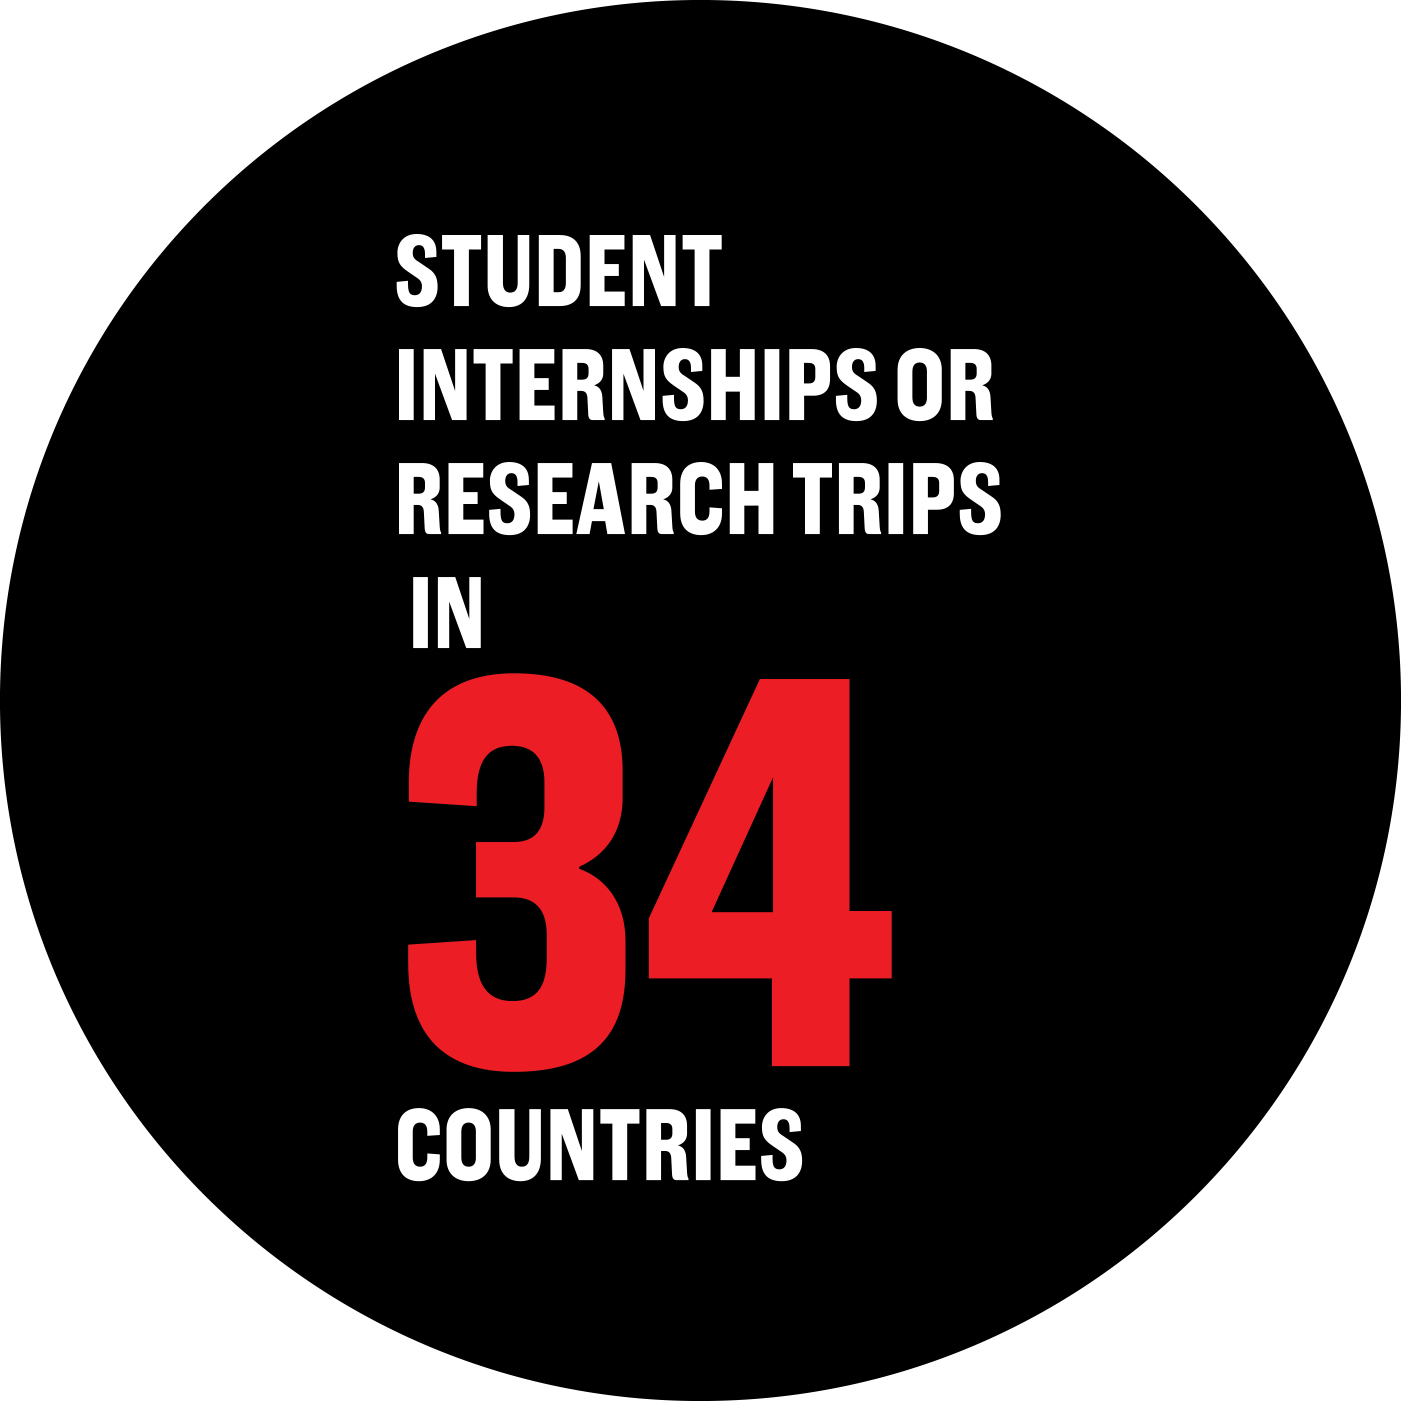 Student internships or research trips in 34 countries